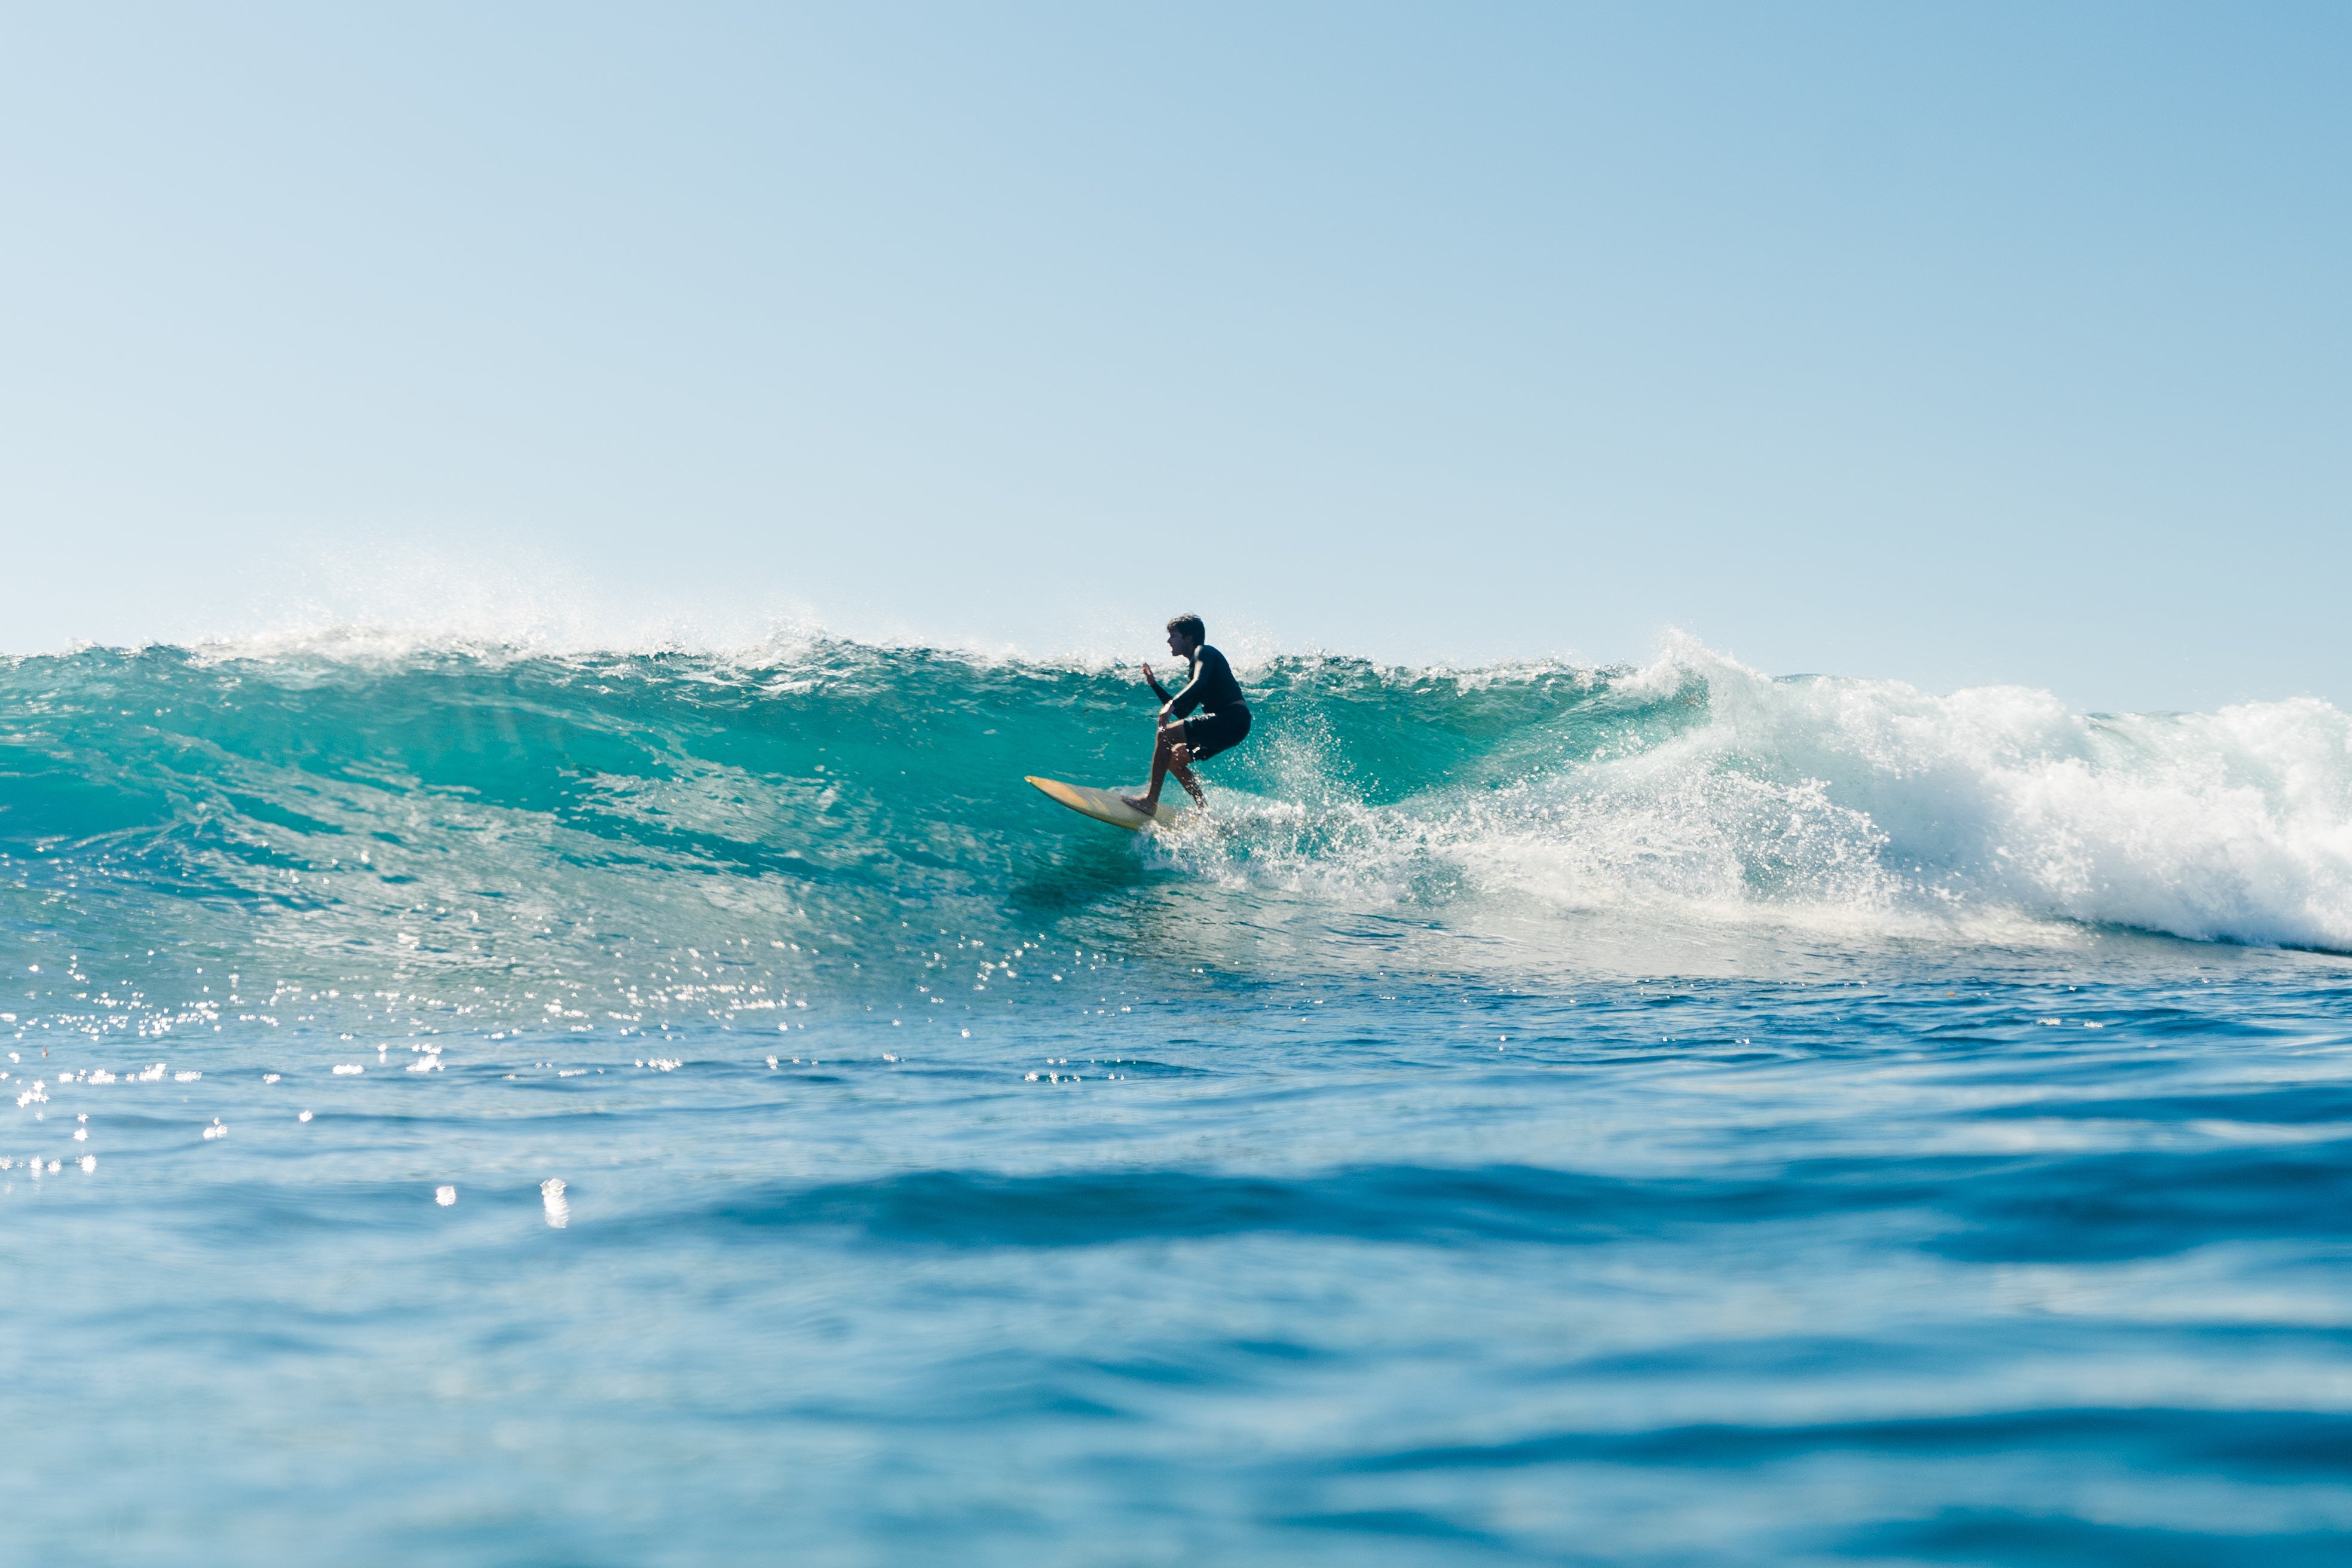 Use This Mental Checklist Every Time You Surf